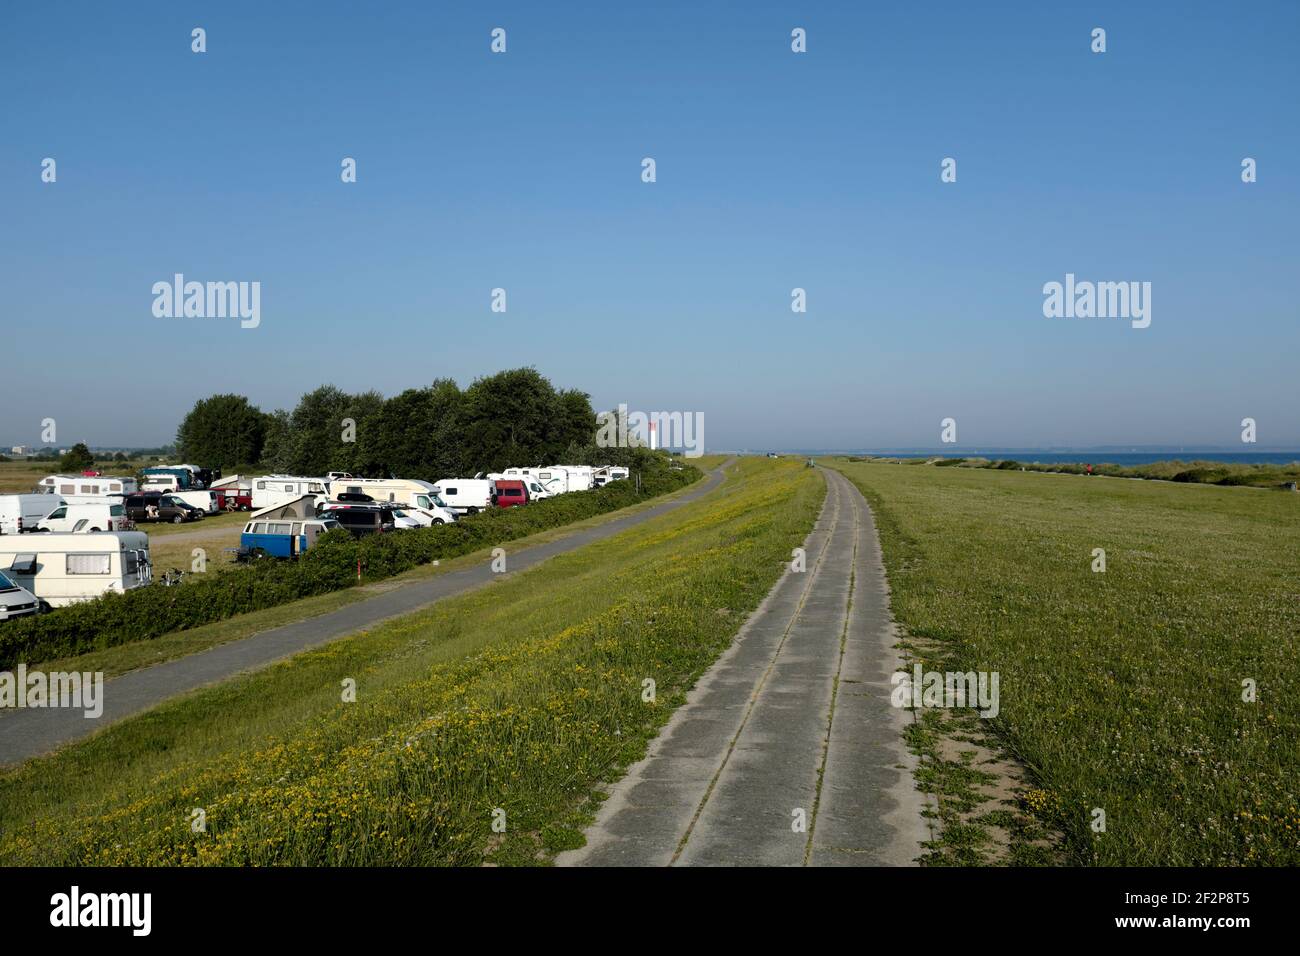 Camping holiday on the Baltic Sea Stock Photo